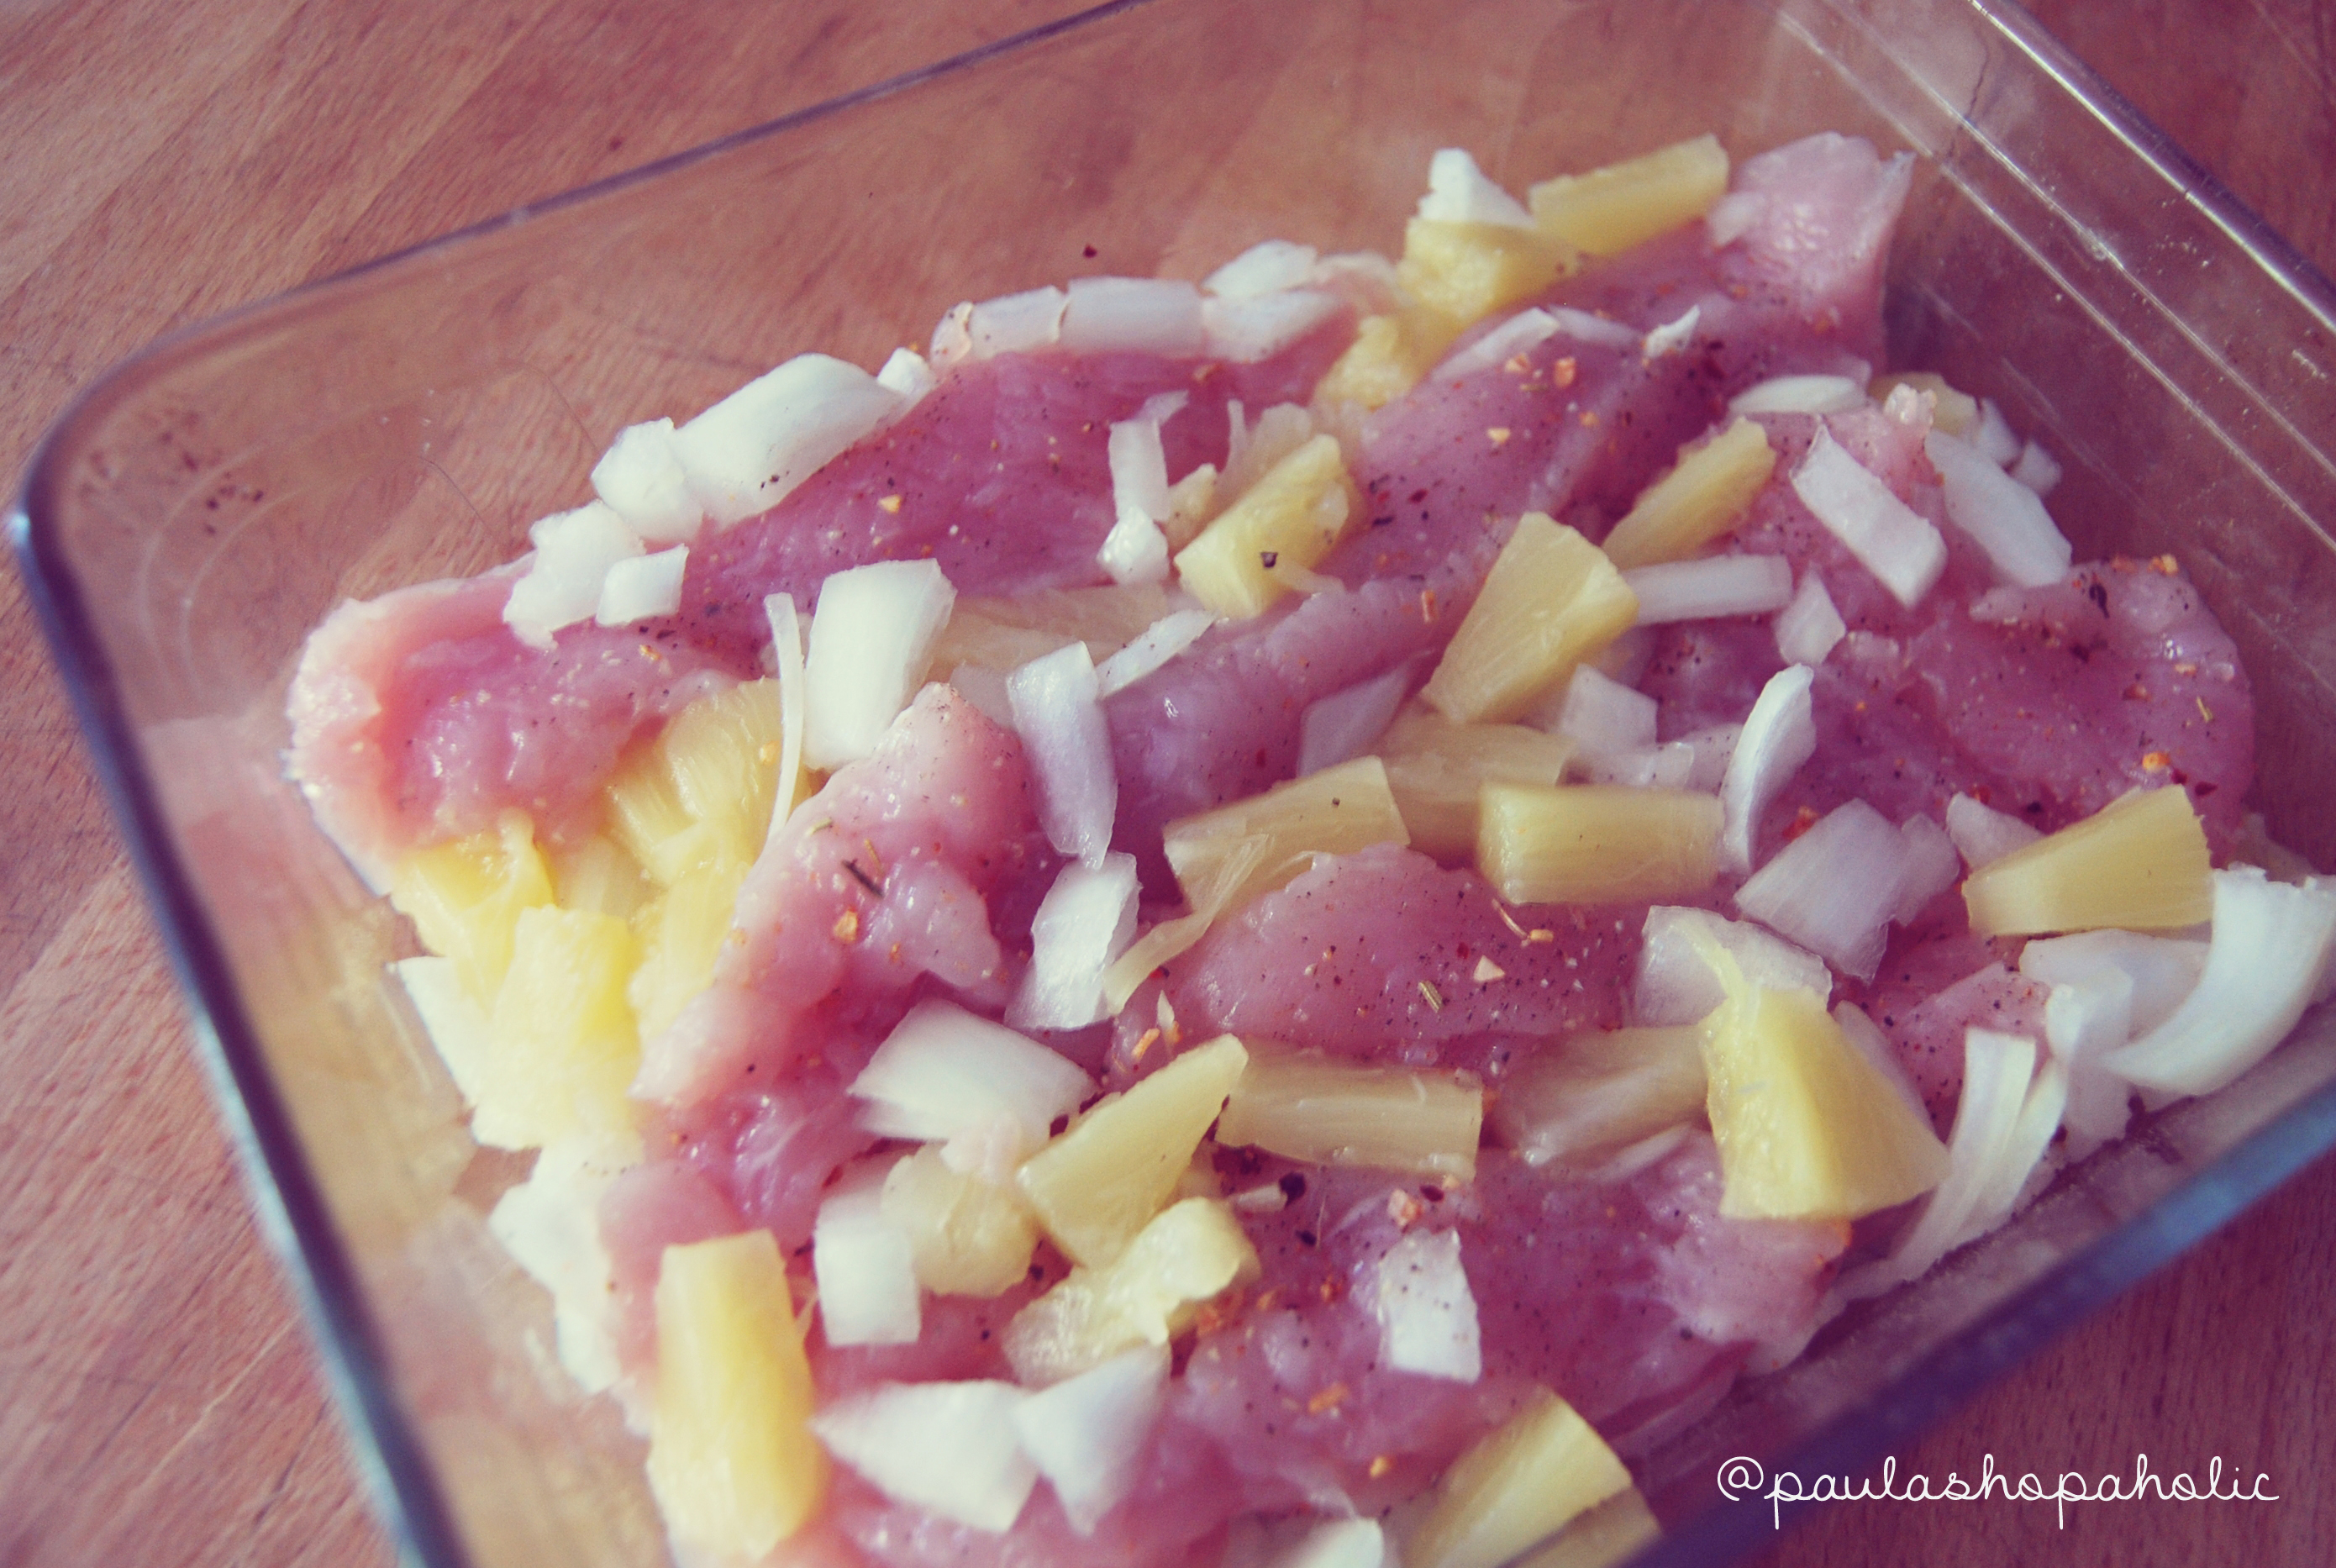 Pavo con piña al horno / Oven baked turkey and pineapple | fit and sweet